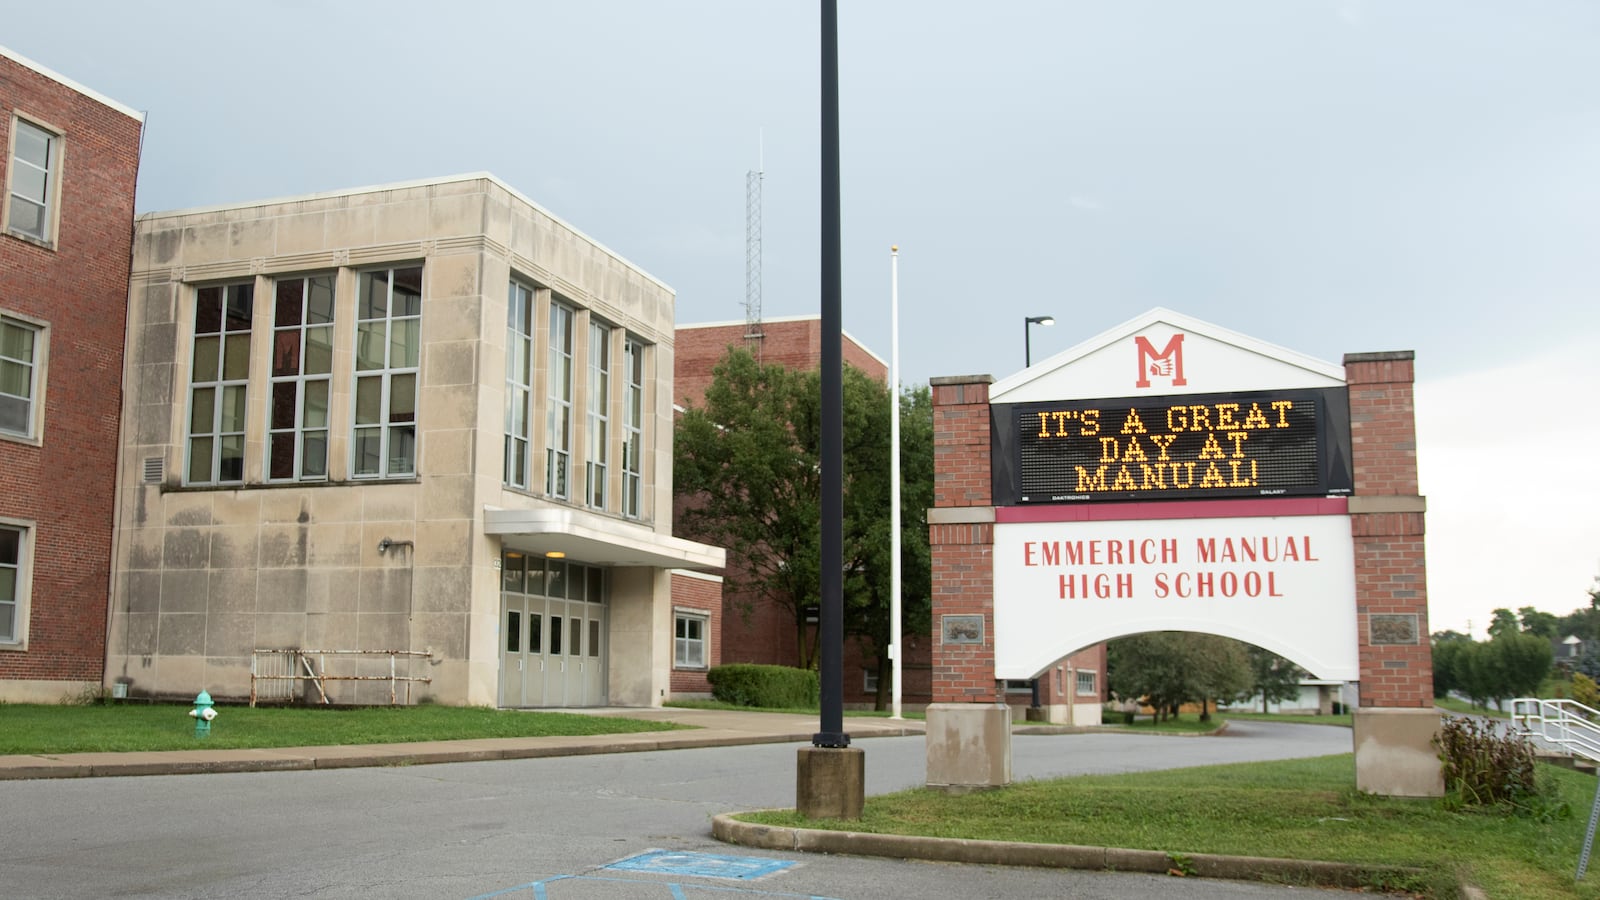 Manual High School in Indianapolis recorded the highest proportion of students who left to home-school, compared to 2018 graduates, out of all traditional high schools in the state, according to a Chalkbeat analysis.